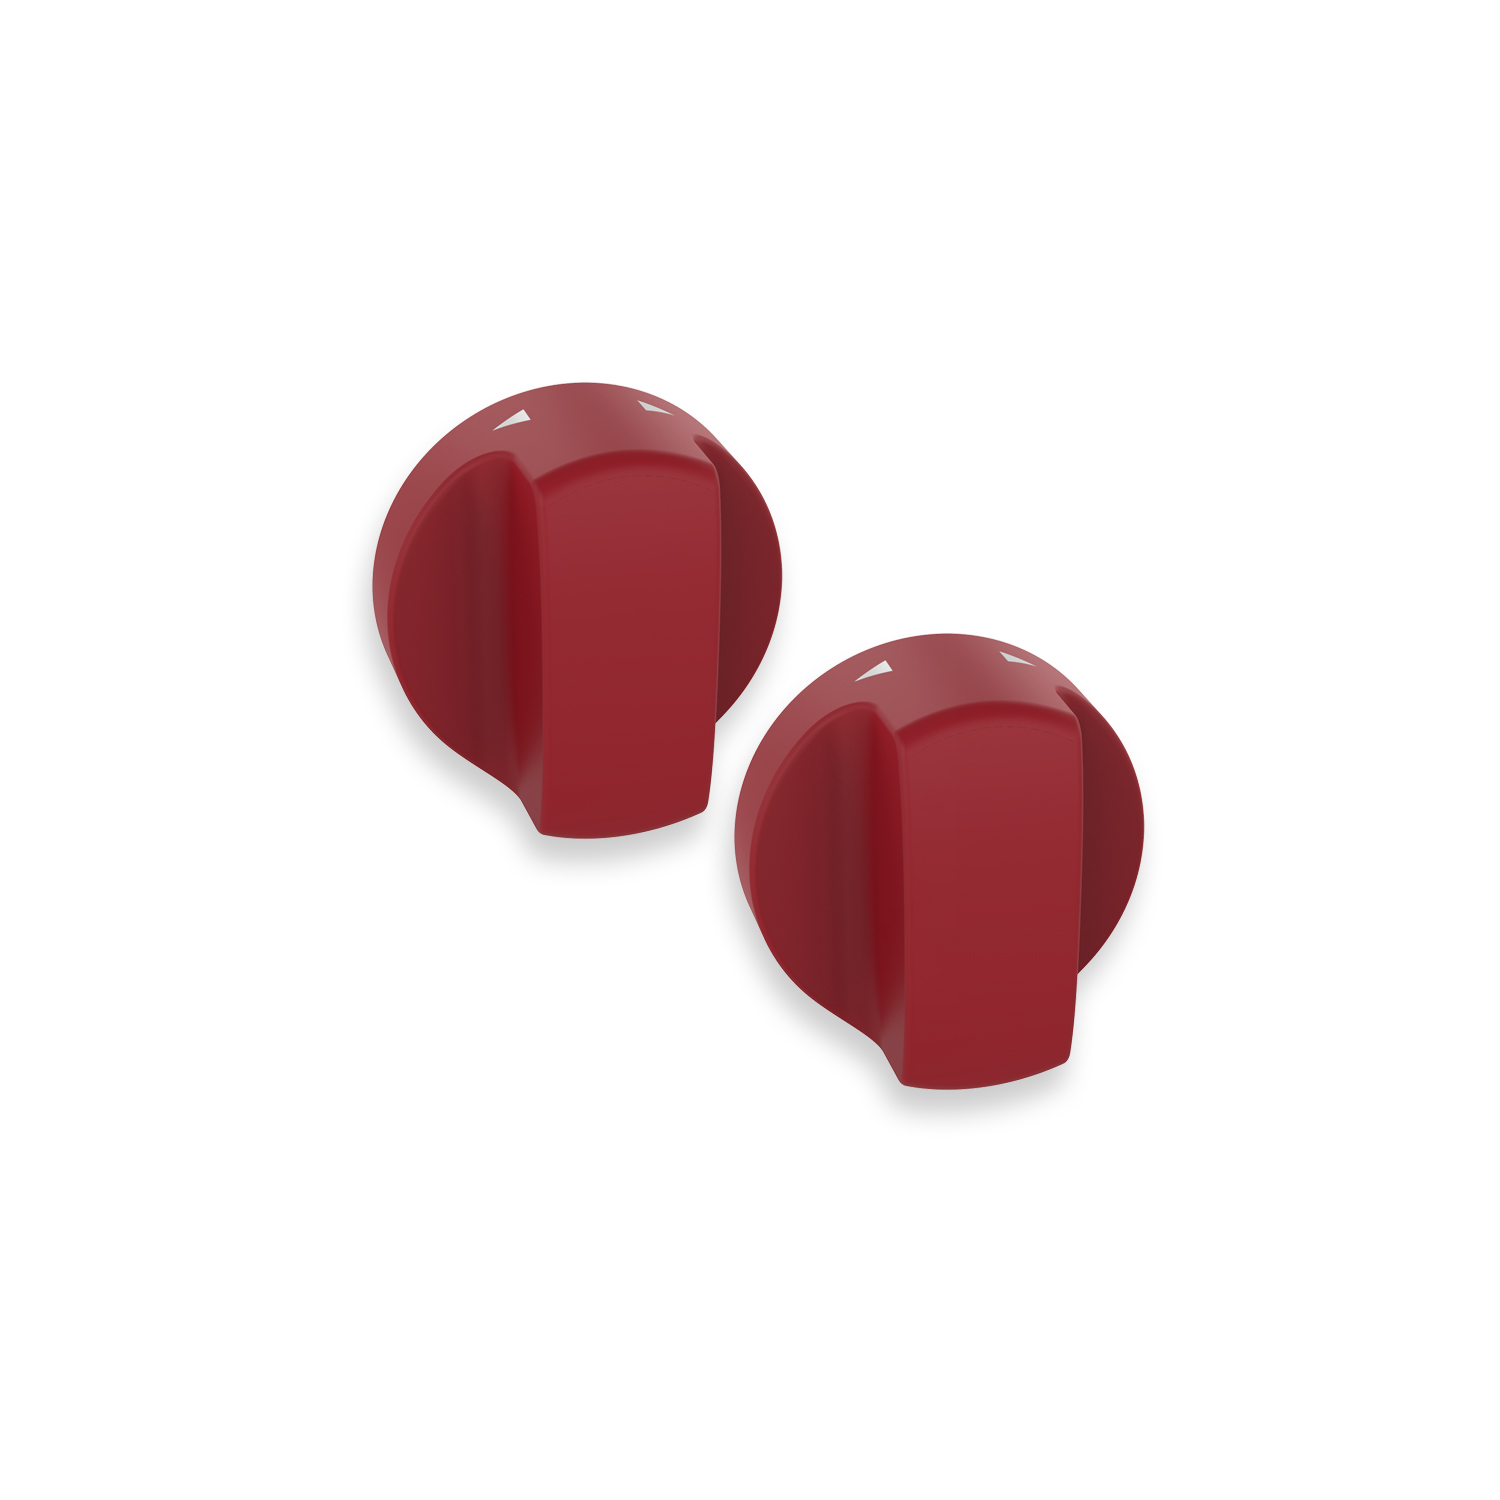 Countertop Oven Knob - Red